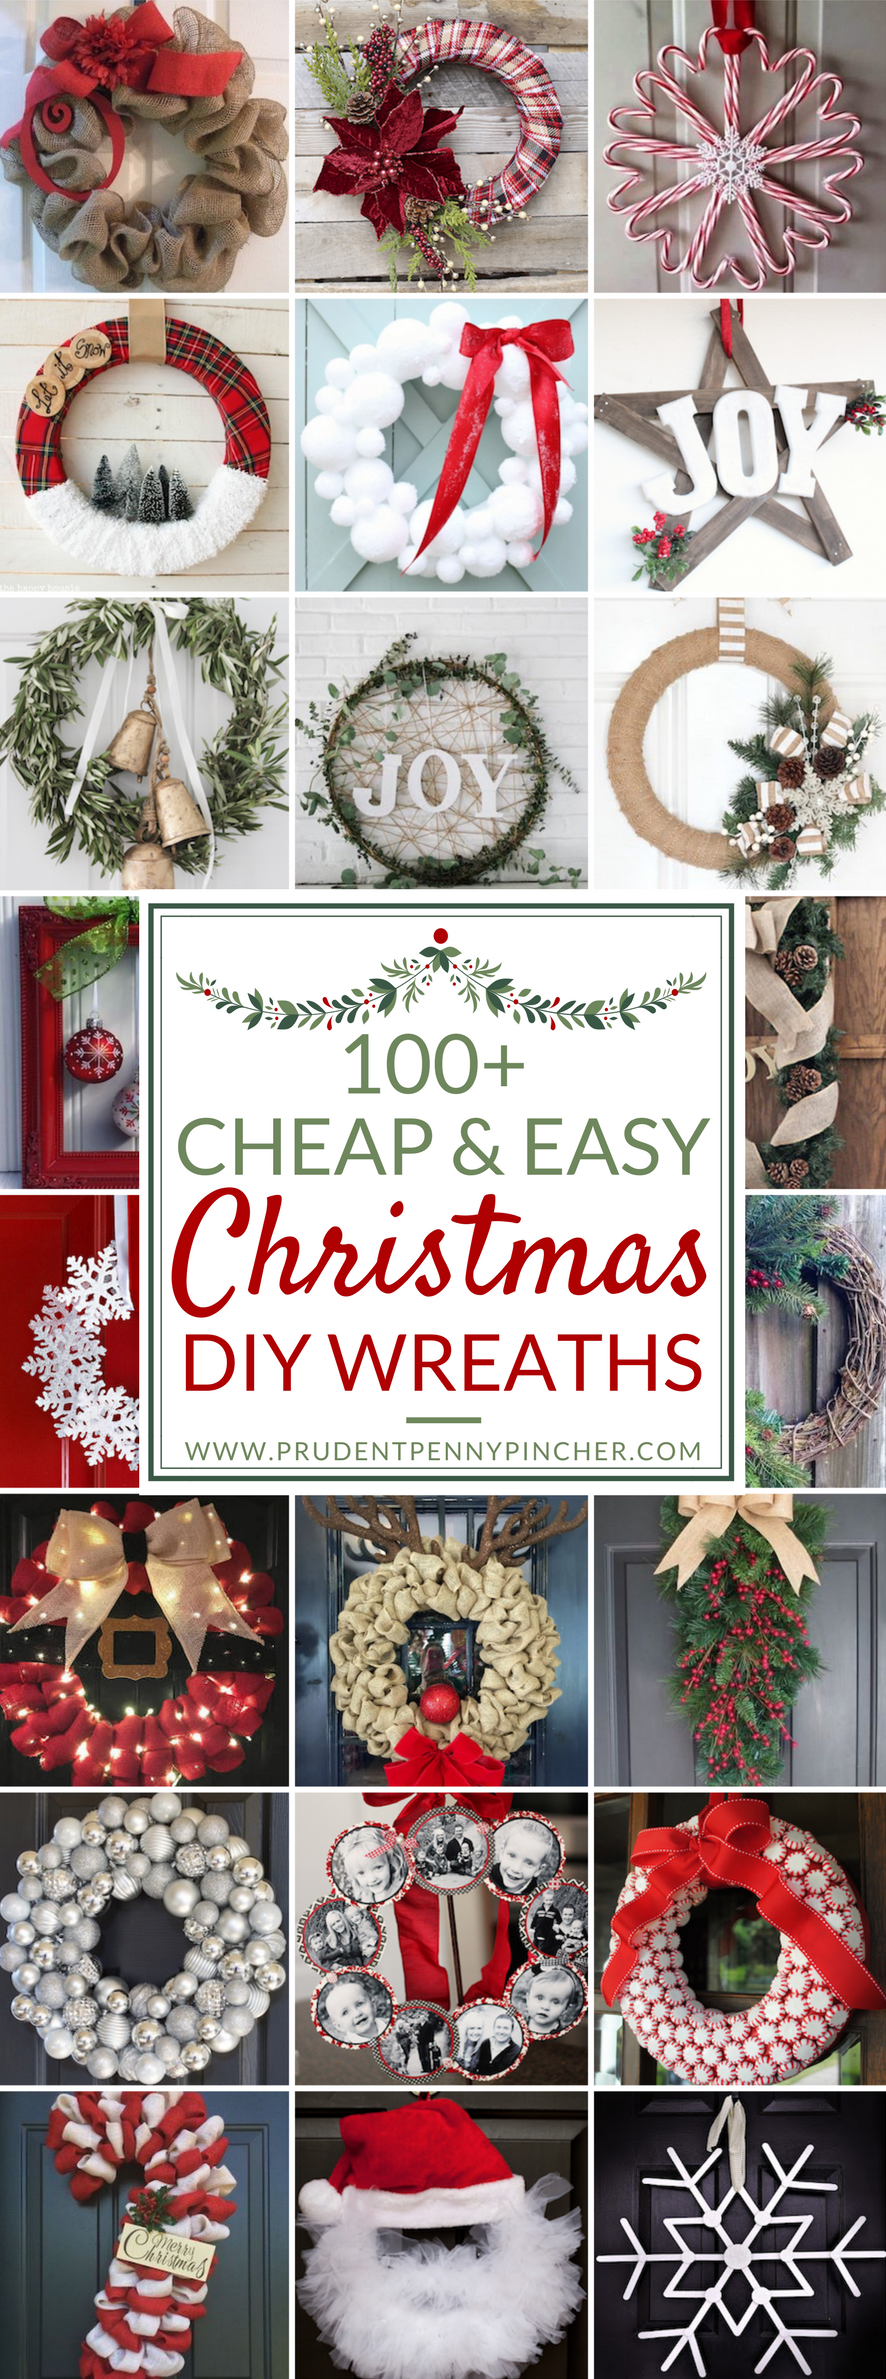 100 Cheap and Easy DIY Christmas Wreaths - Prudent Penny Pincher